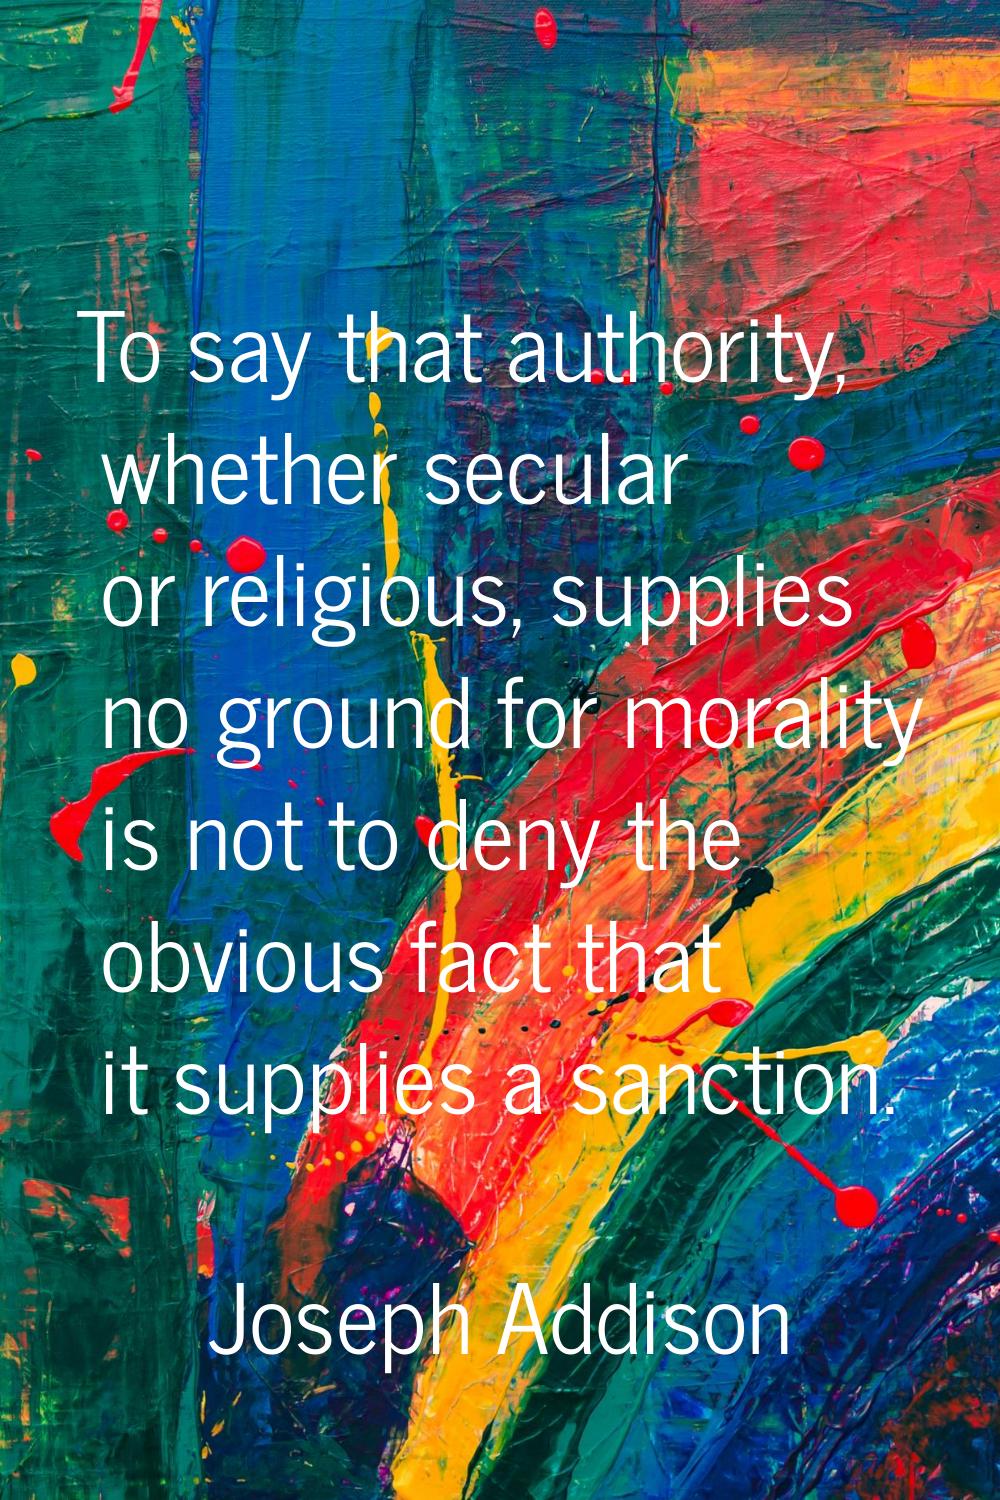 To say that authority, whether secular or religious, supplies no ground for morality is not to deny